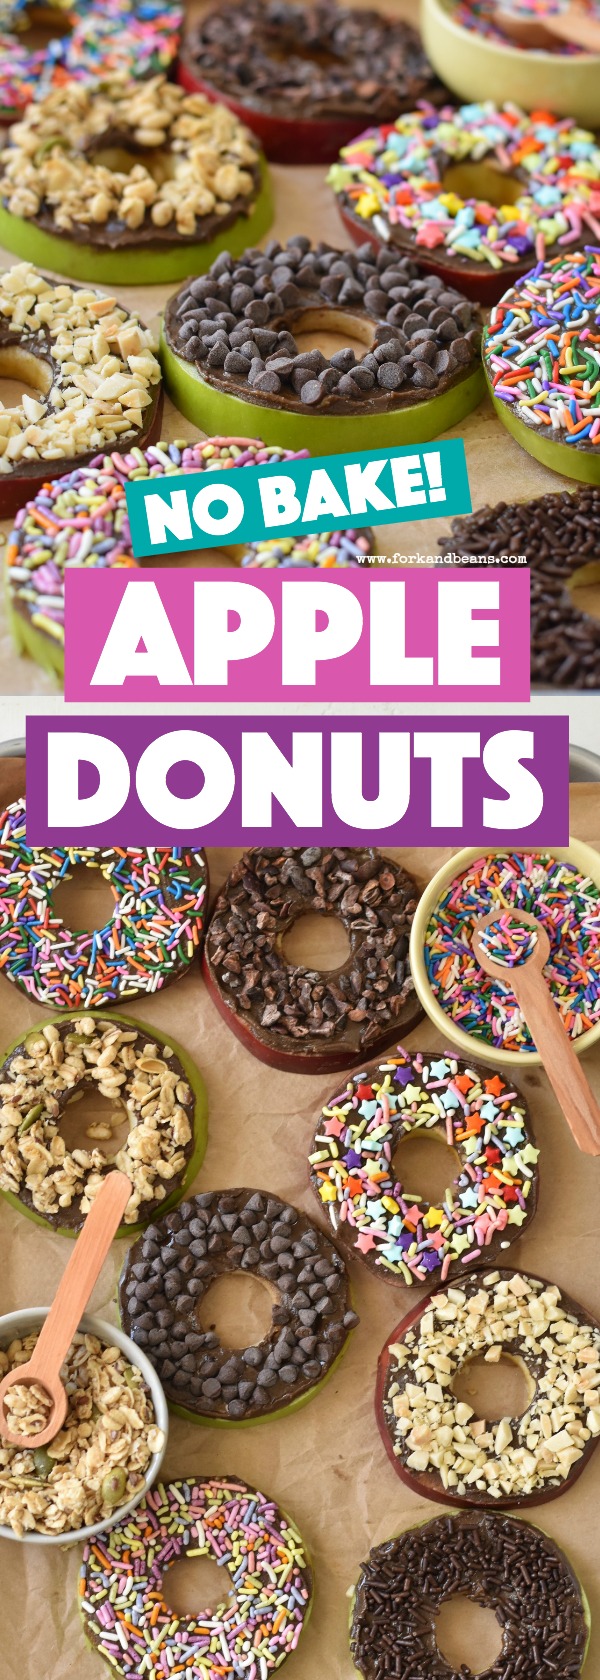 These easy, no bake apple donuts are the perfect after school snack for kids, full of healthy and good-for-you ingredients.